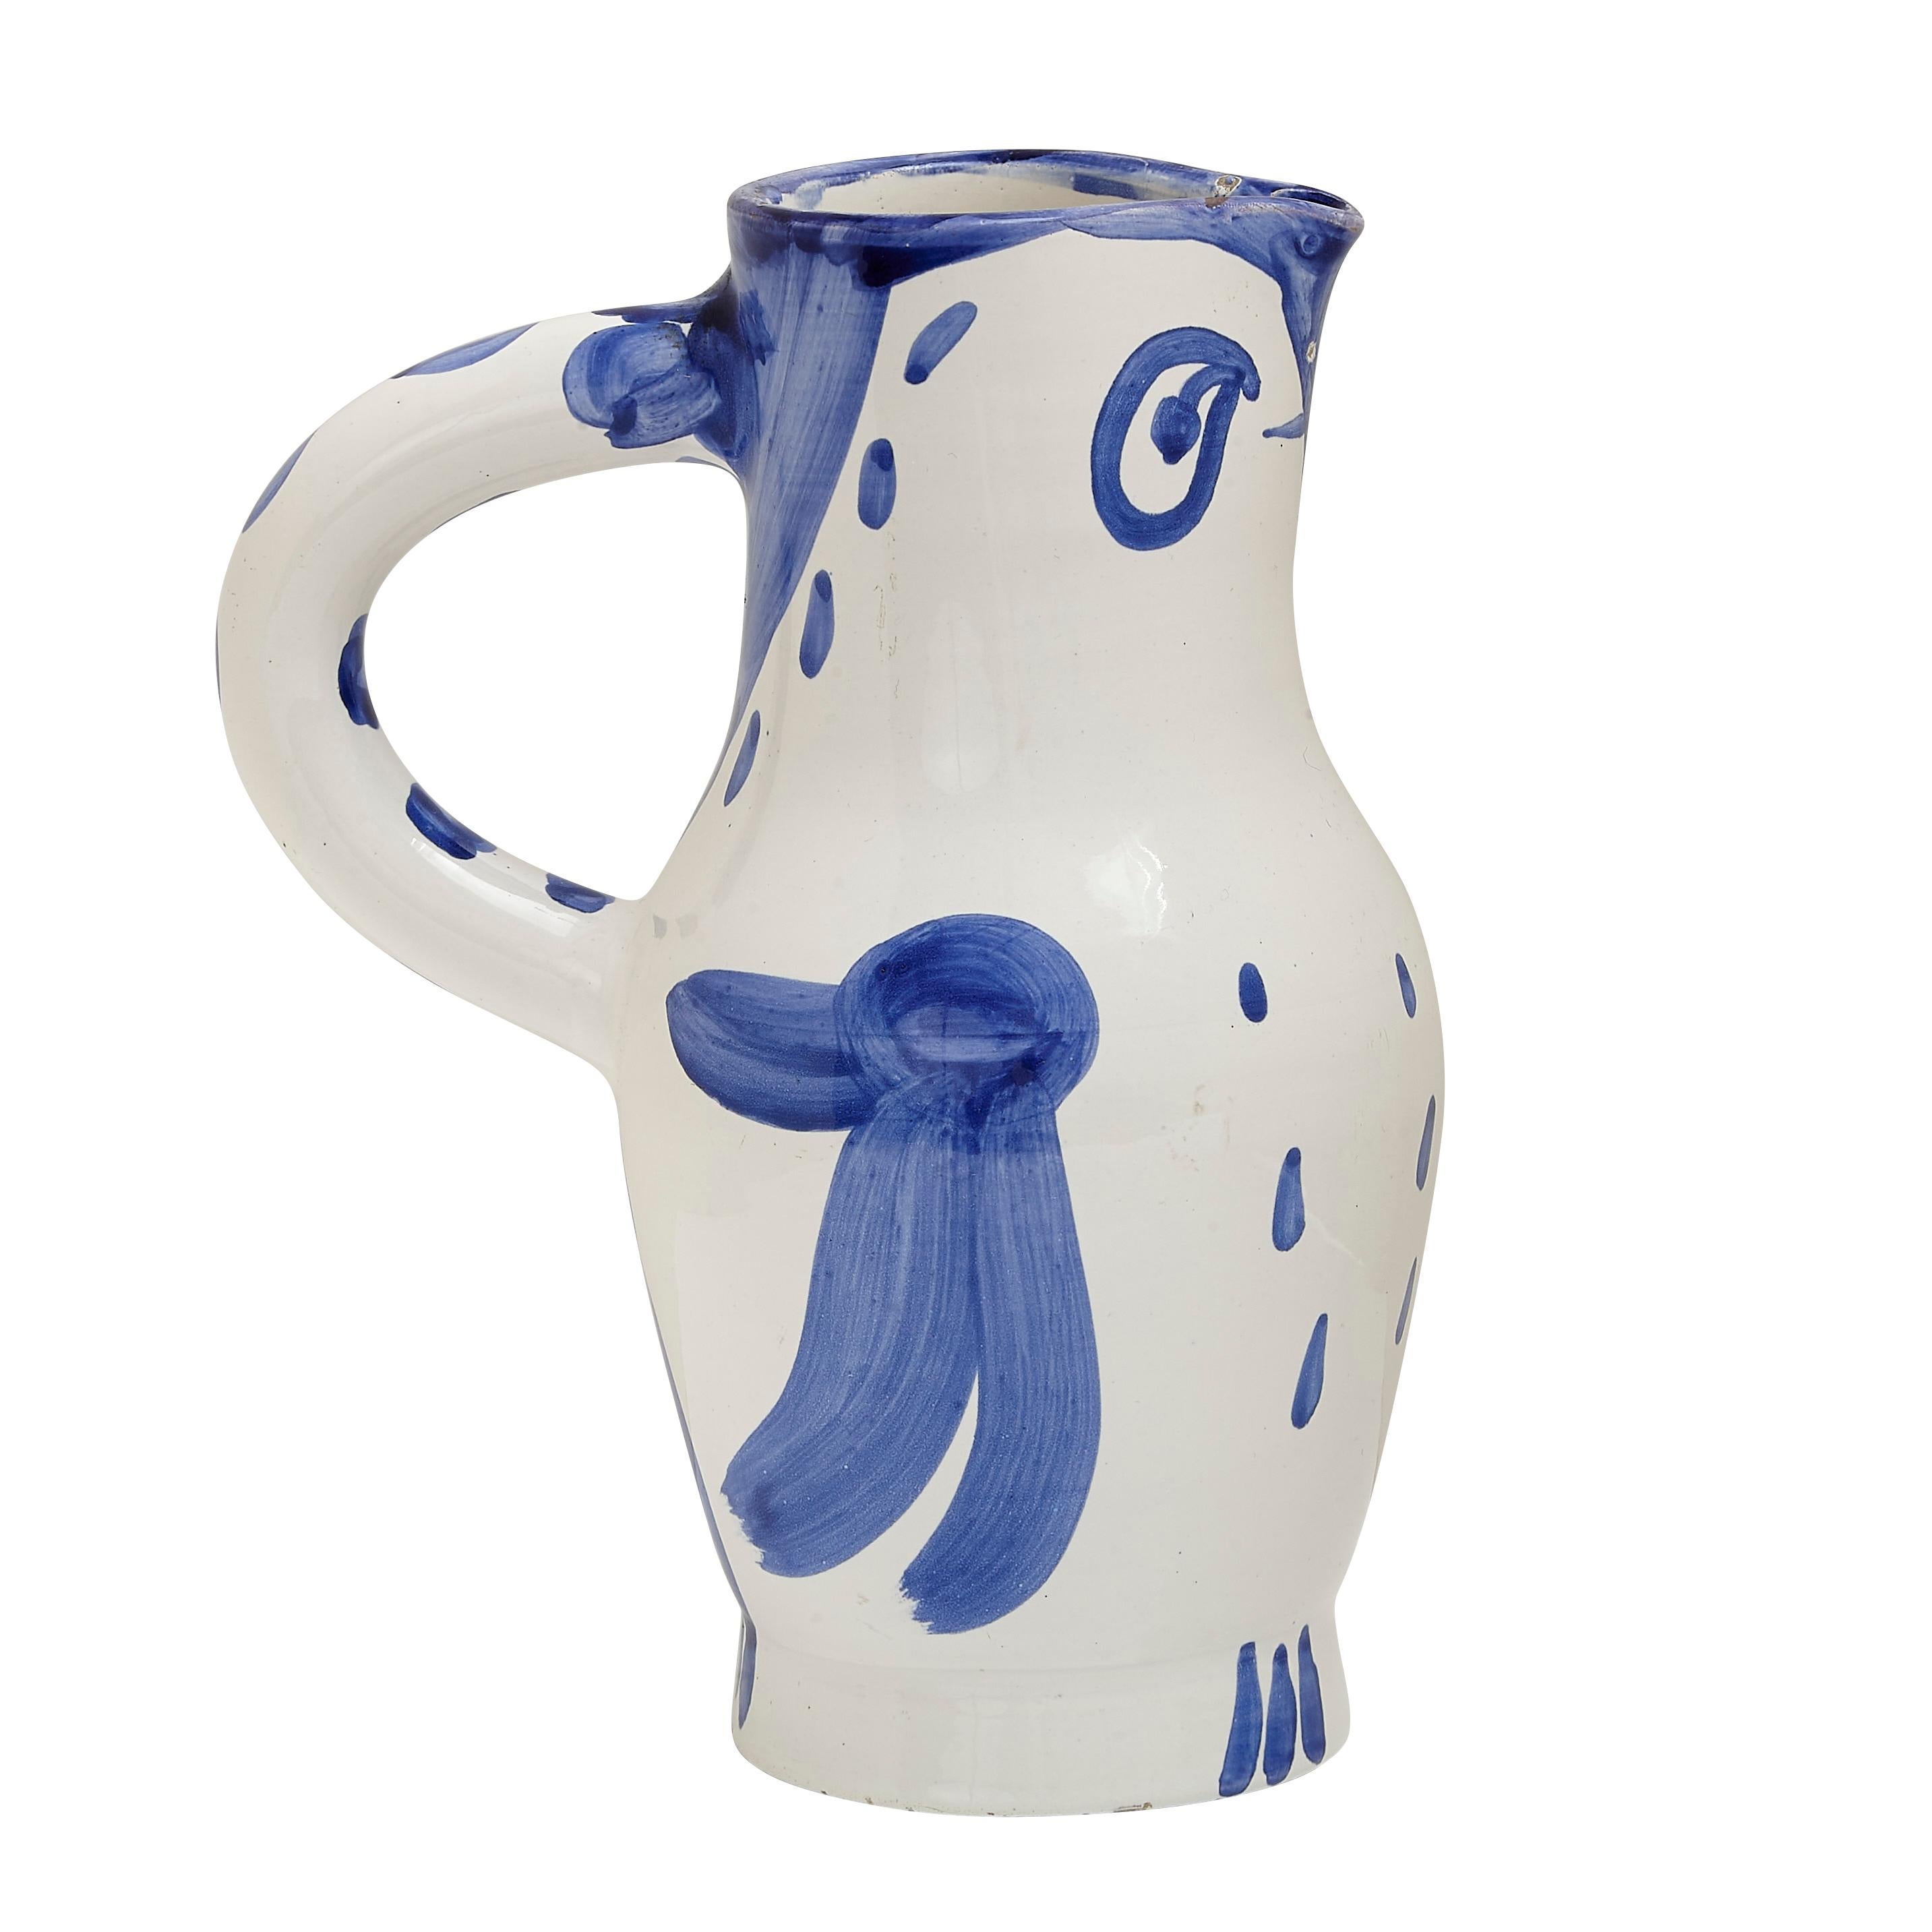 PABLO PICASSO (1881-1973) 
Hibou (A. R. 253) 

Terre de faïence pitcher, painted in colors and glazed, 1954, from the edition of 500, inscribed 'Edition Picasso' and 'Madoura', with the Edition Picasso and Madoura stamps.